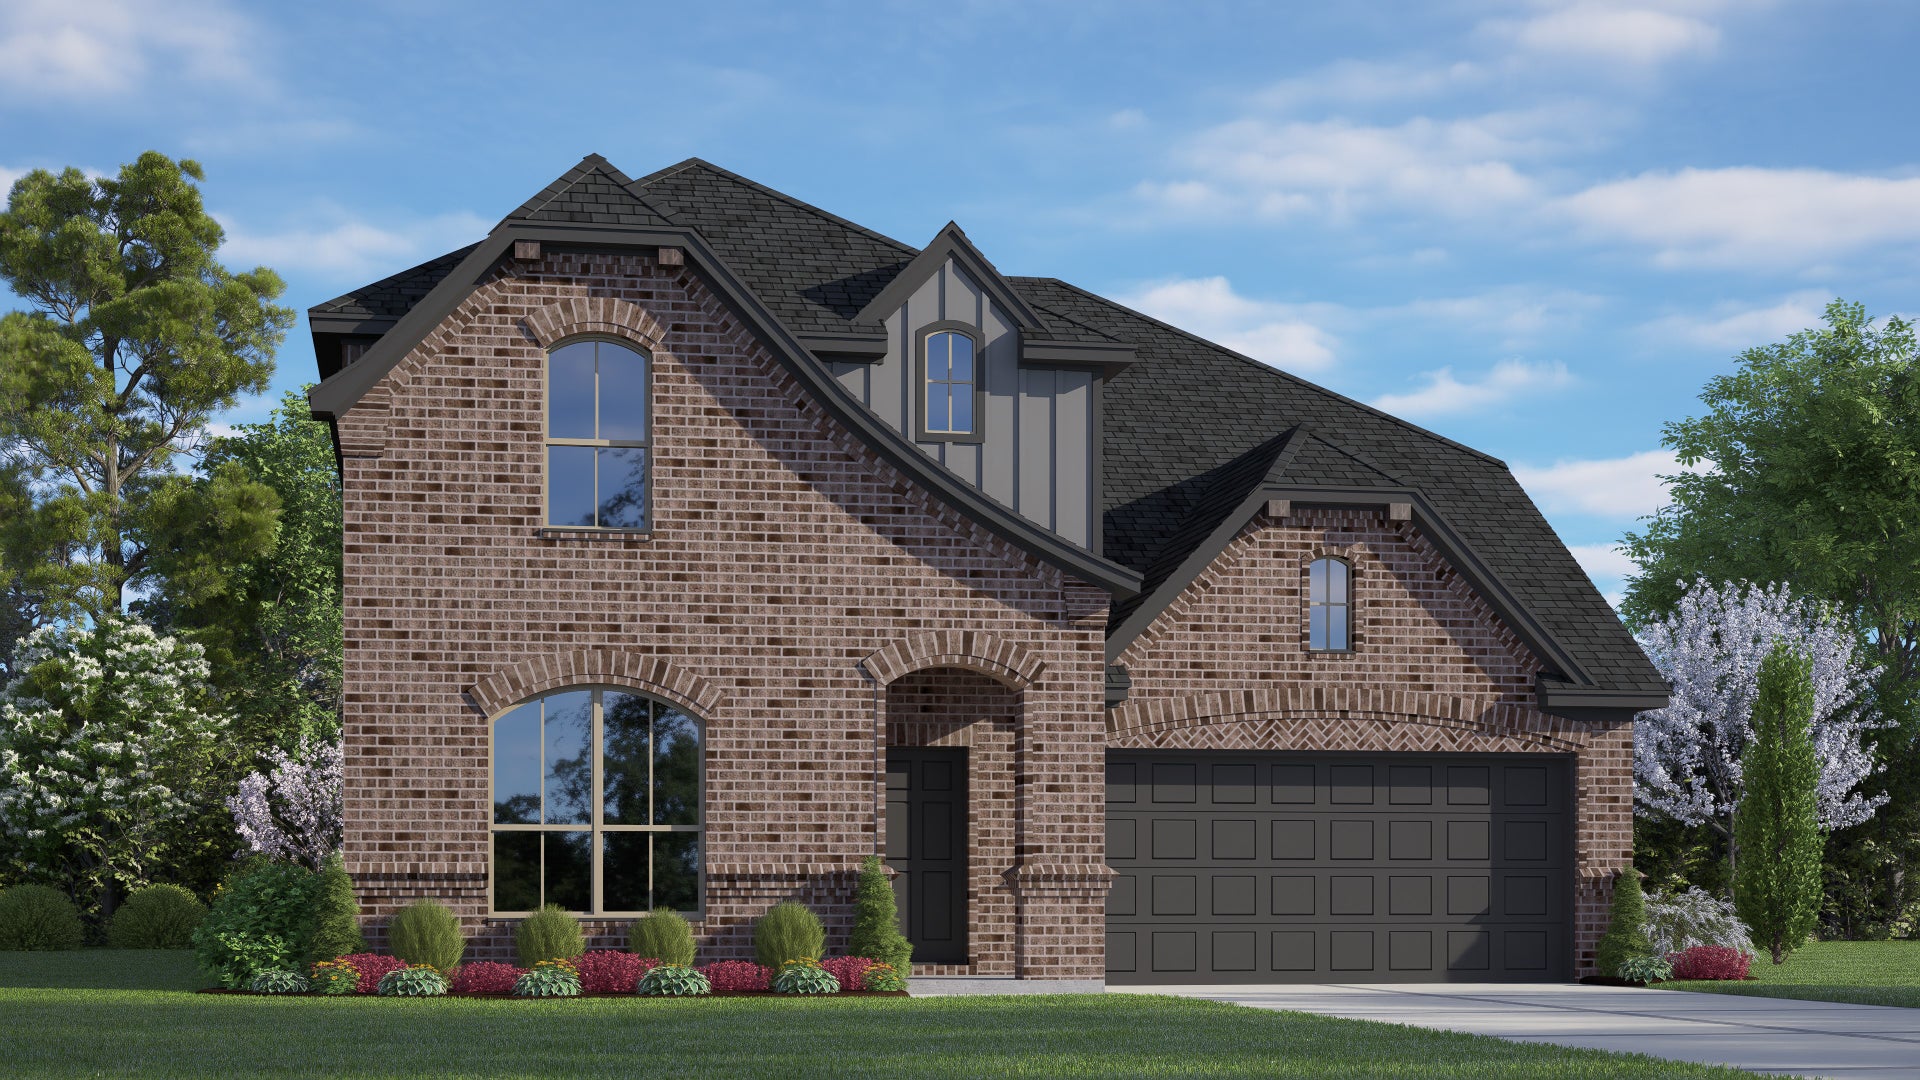 2870 C. Concept 2870 Home with 4 Bedrooms